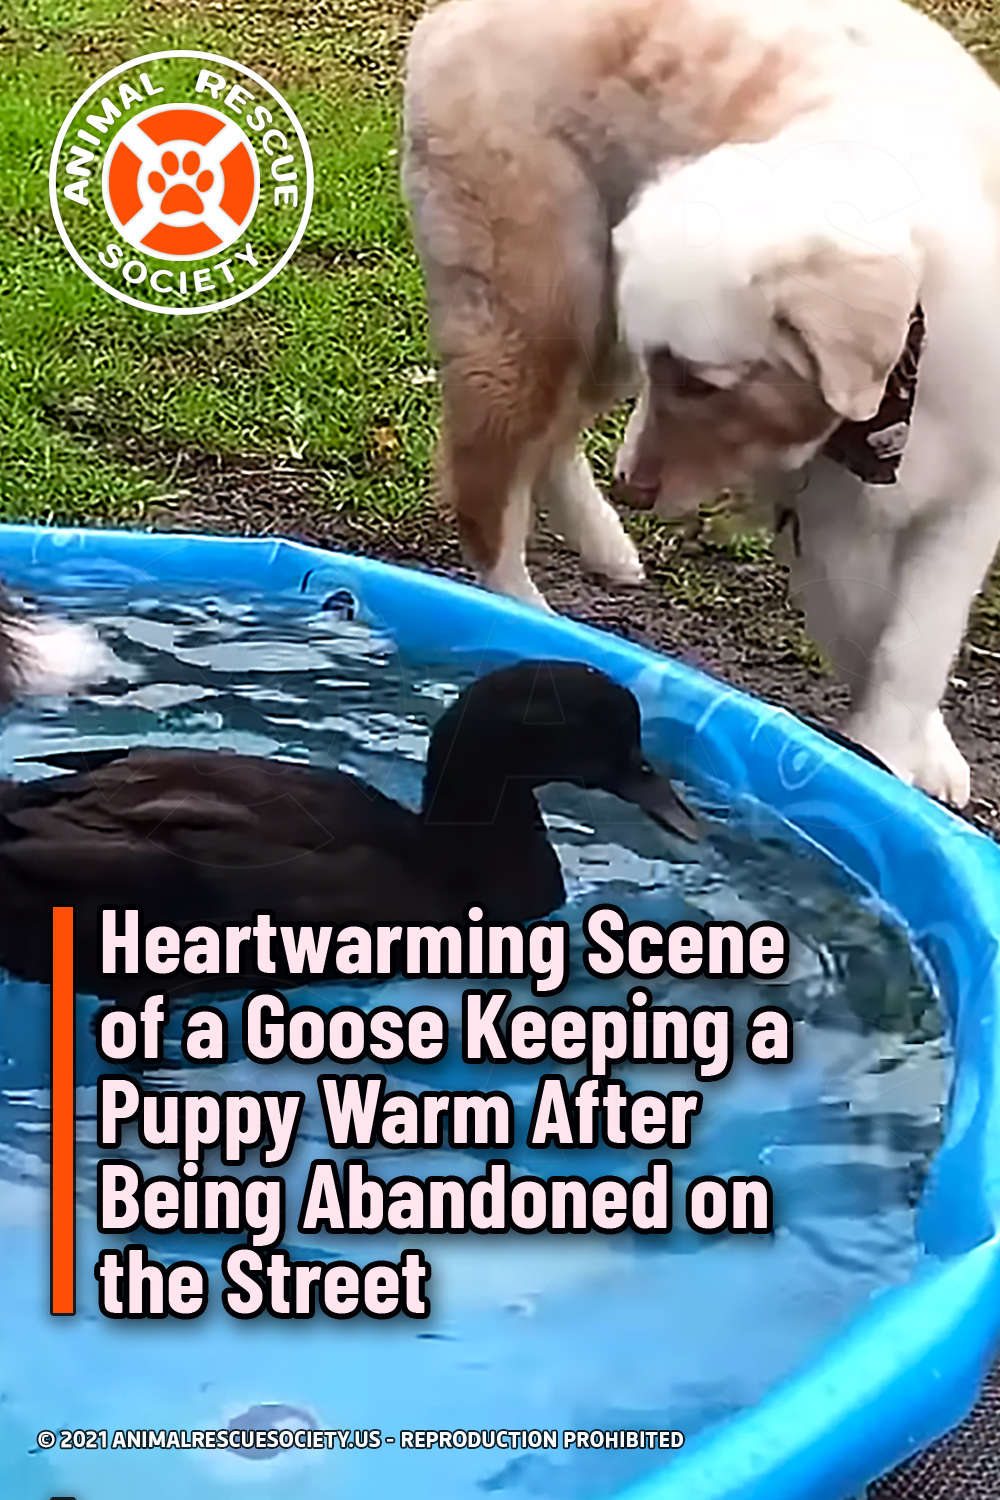 Heartwarming Scene of a Goose Keeping a Puppy Warm After Being Abandoned on the Street